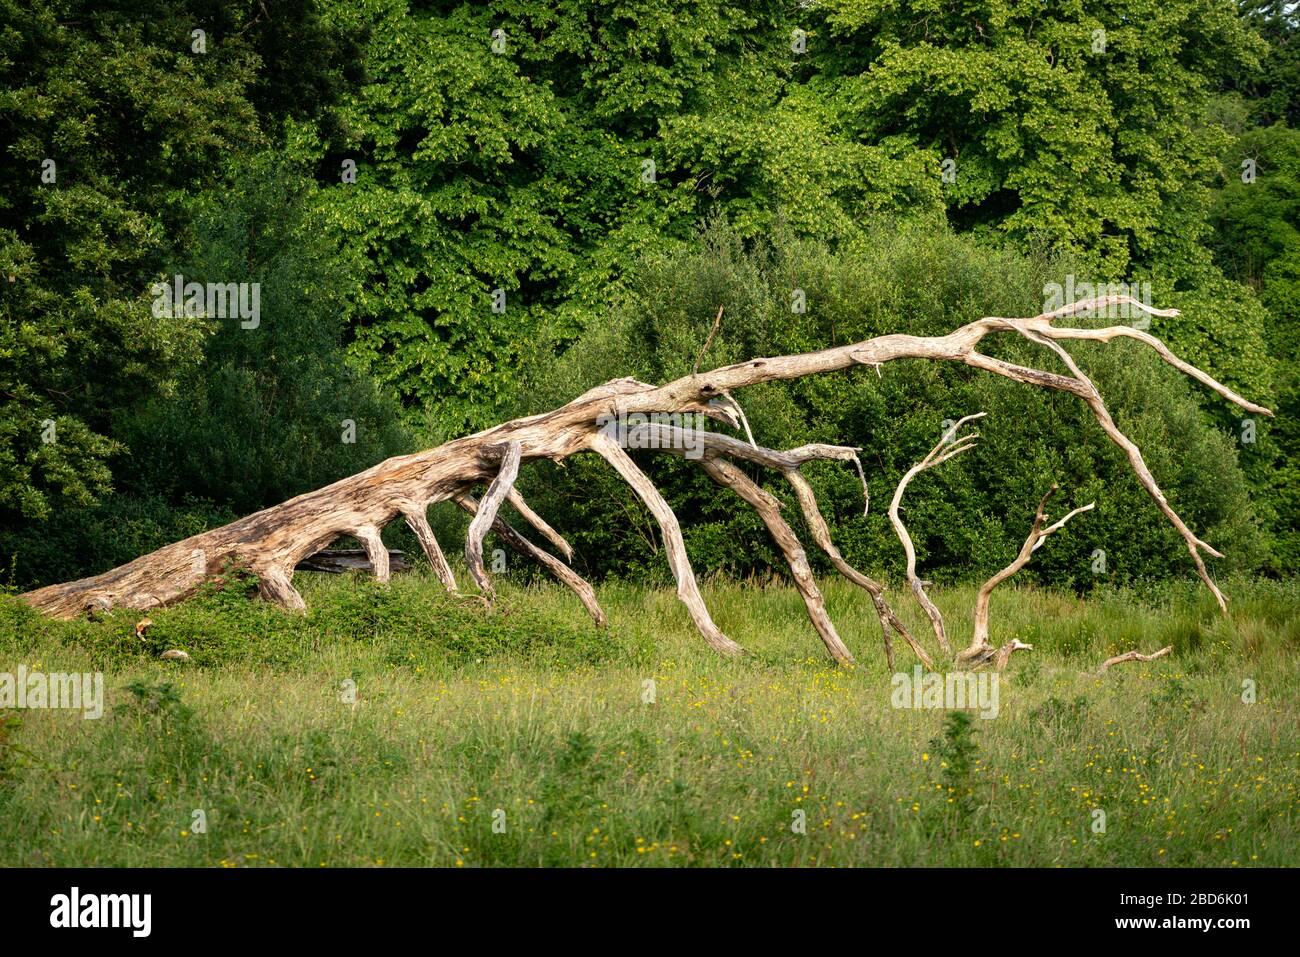 Fallen old dry tree against lush blooming greenery as nature juxtaposition on sunny summer day in Killarney National Park, County Kerry, Ireland Stock Photo